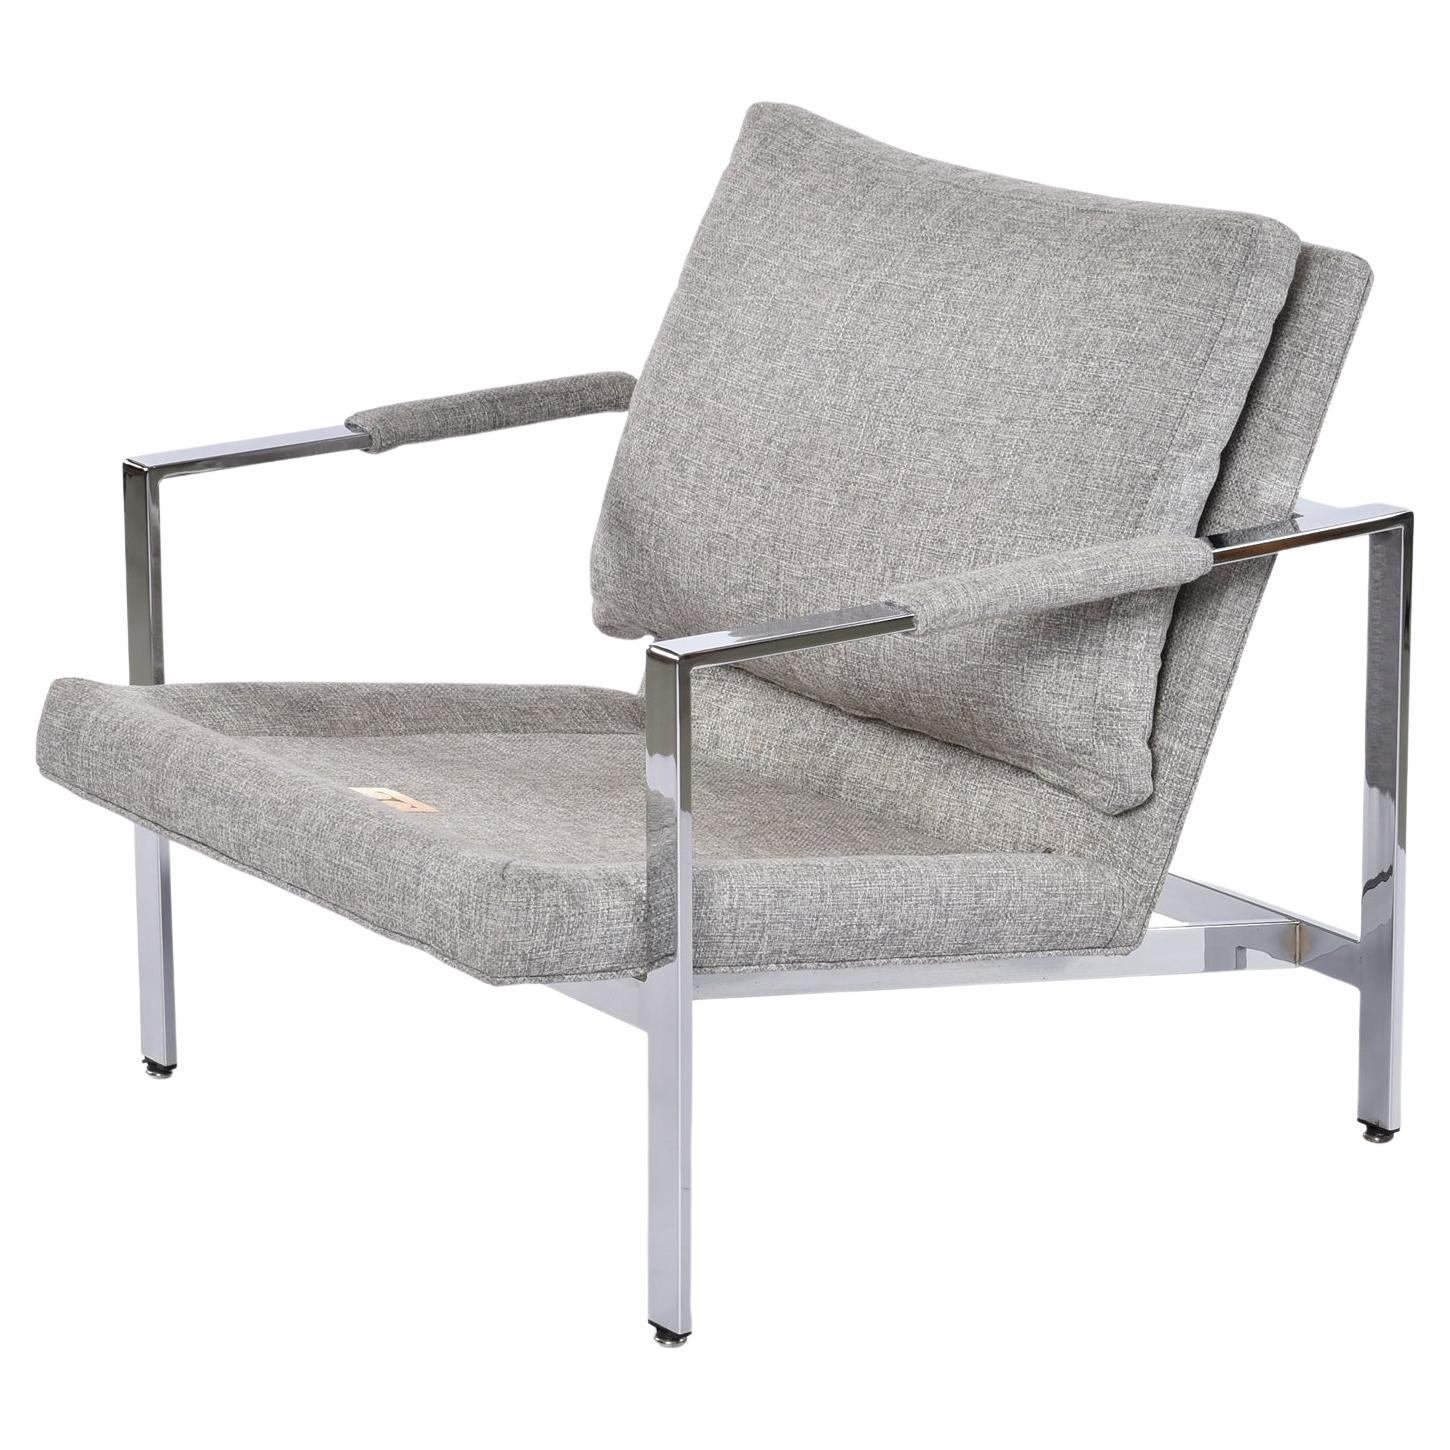 Milo Baughman For Thayer Coggin 951 Flat Bar Chrome Lounge Chairs in Grey Tweed For Sale 3